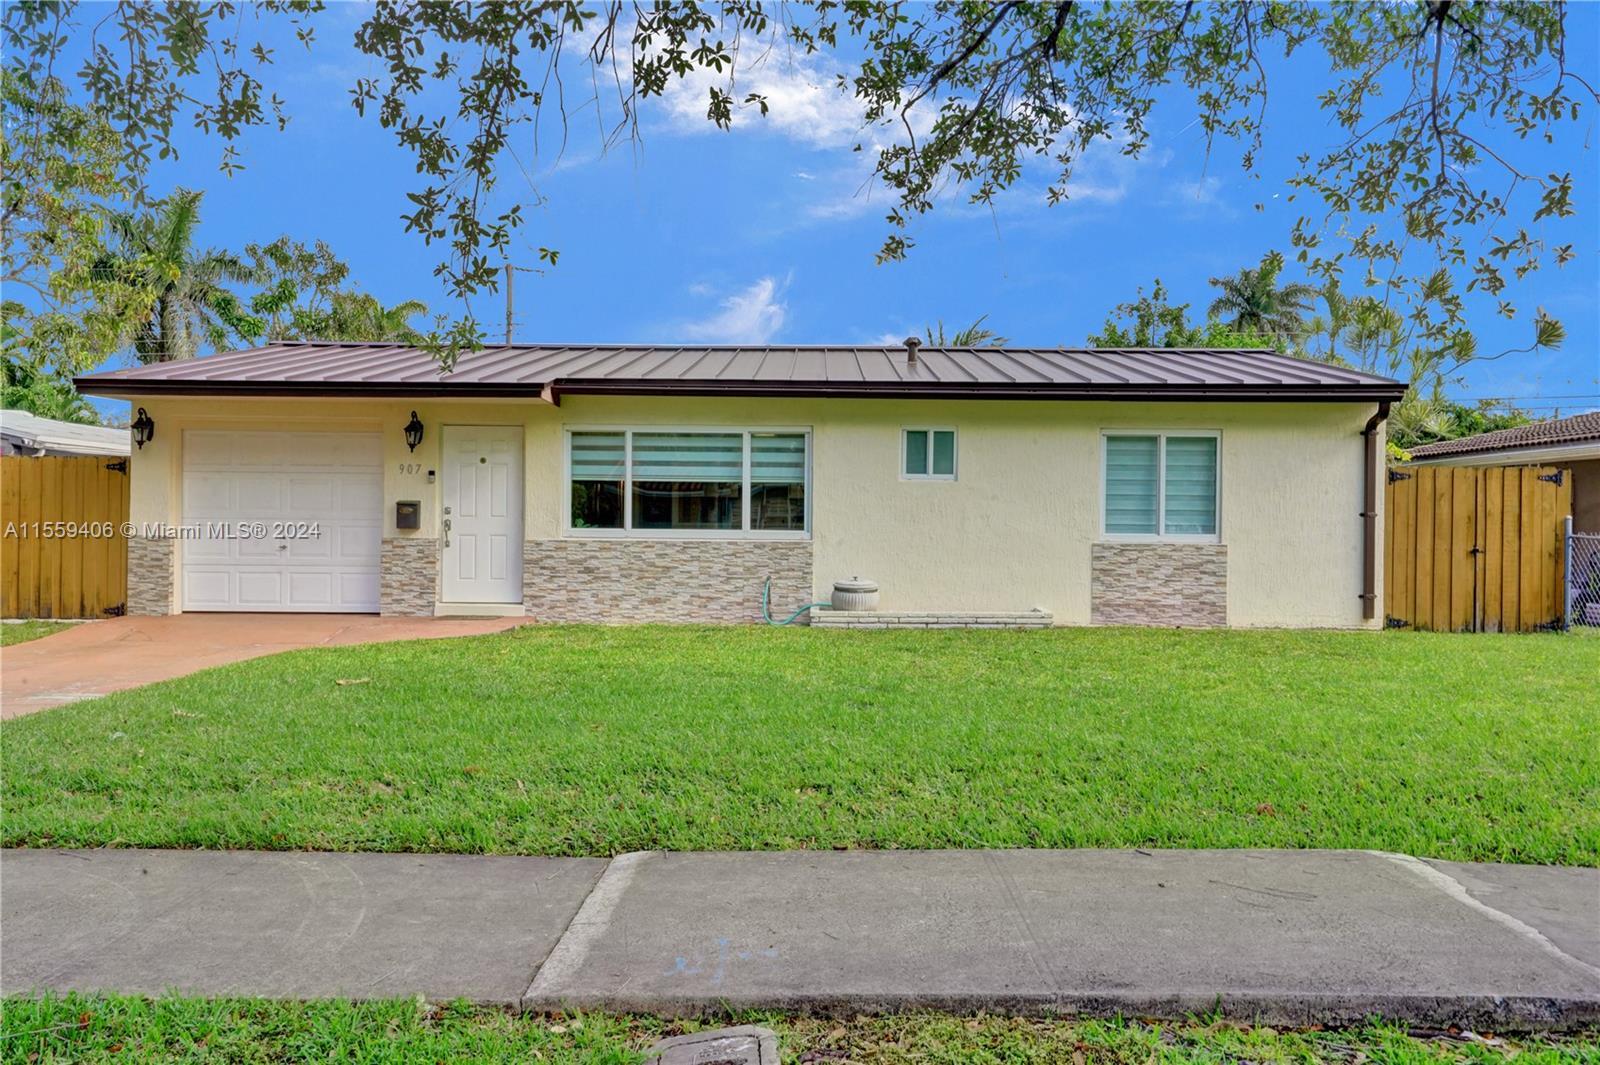 This beautiful home is located on a quiet tree lined street in the heart of Hallandale Beach. This a